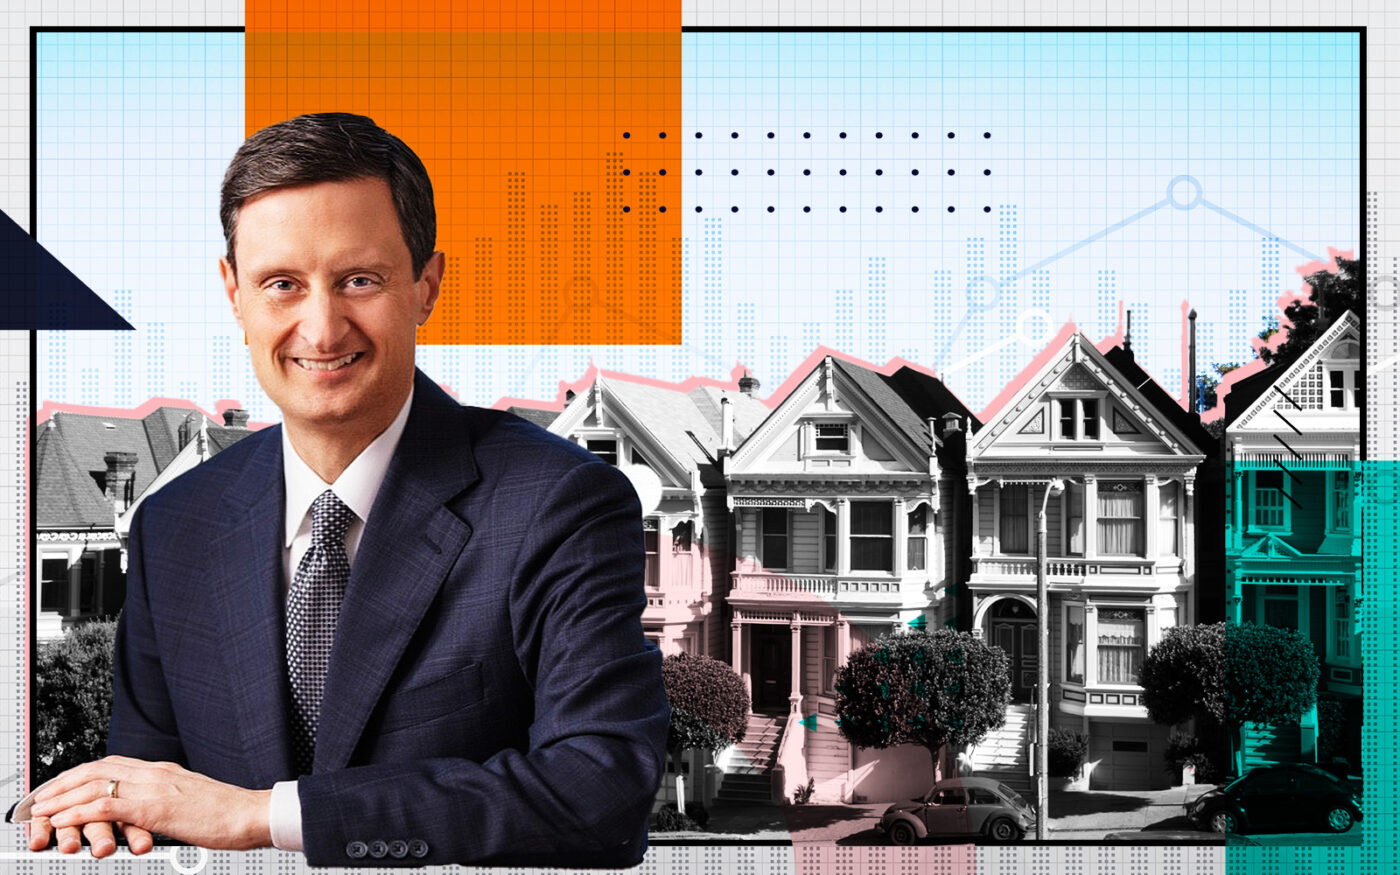 Single Family homes with First Republic Bank CEO Mike Roffler